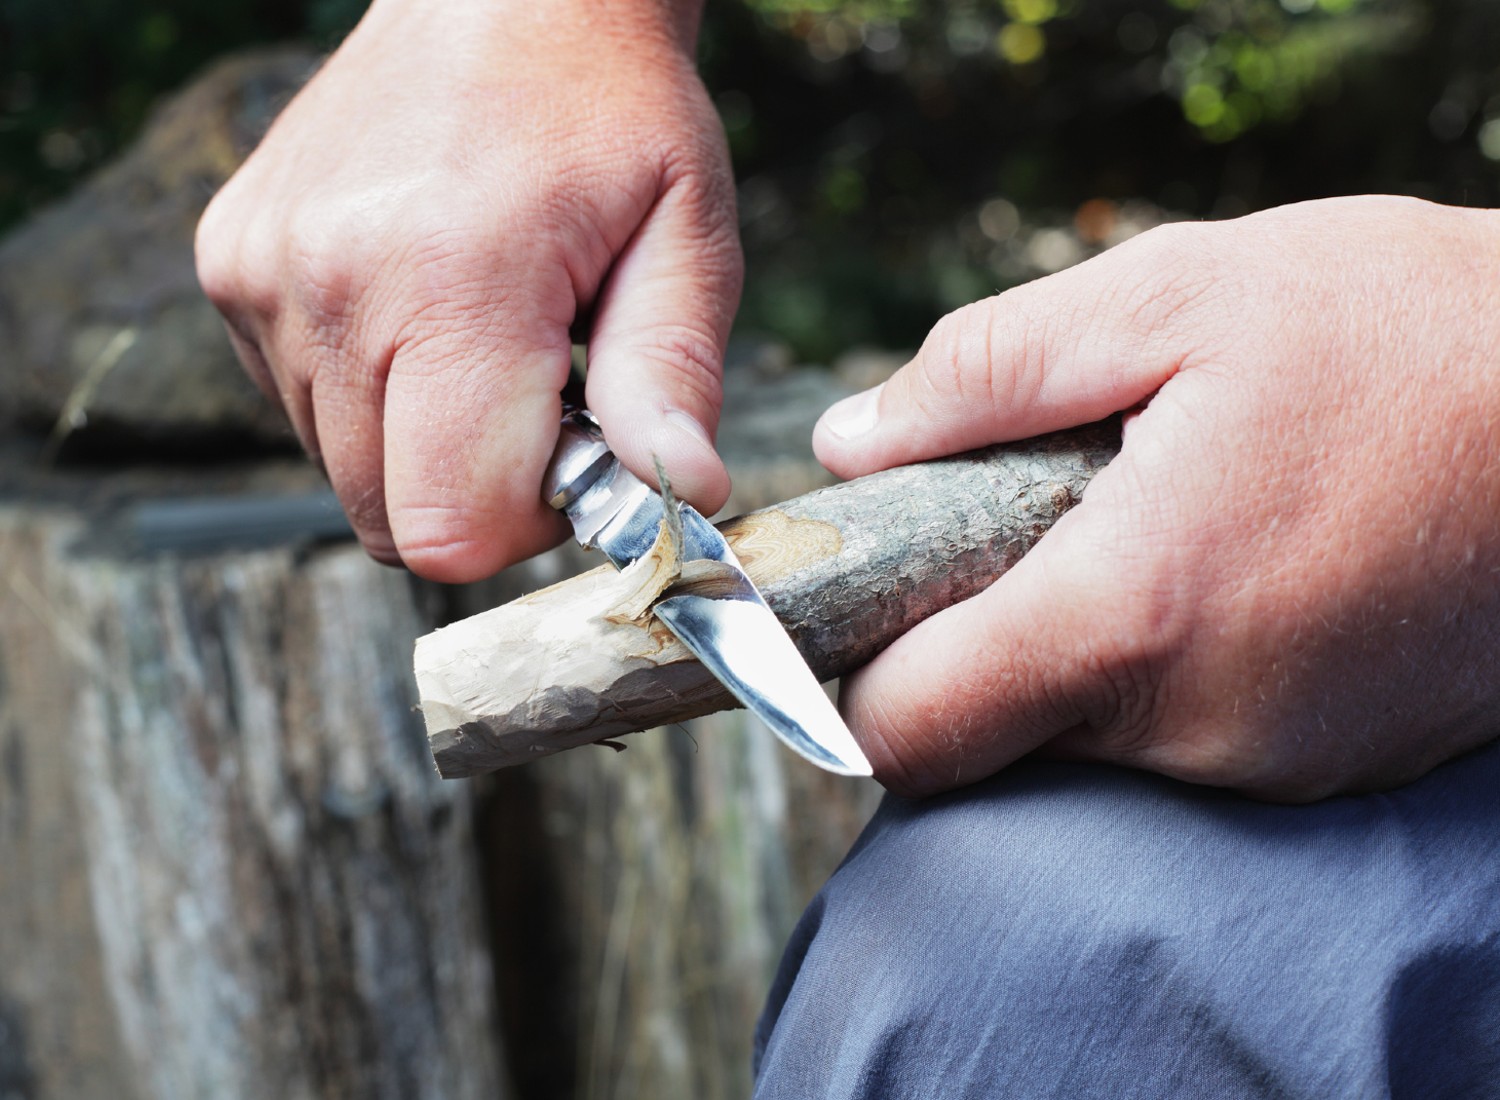 Man carving wood with a knife